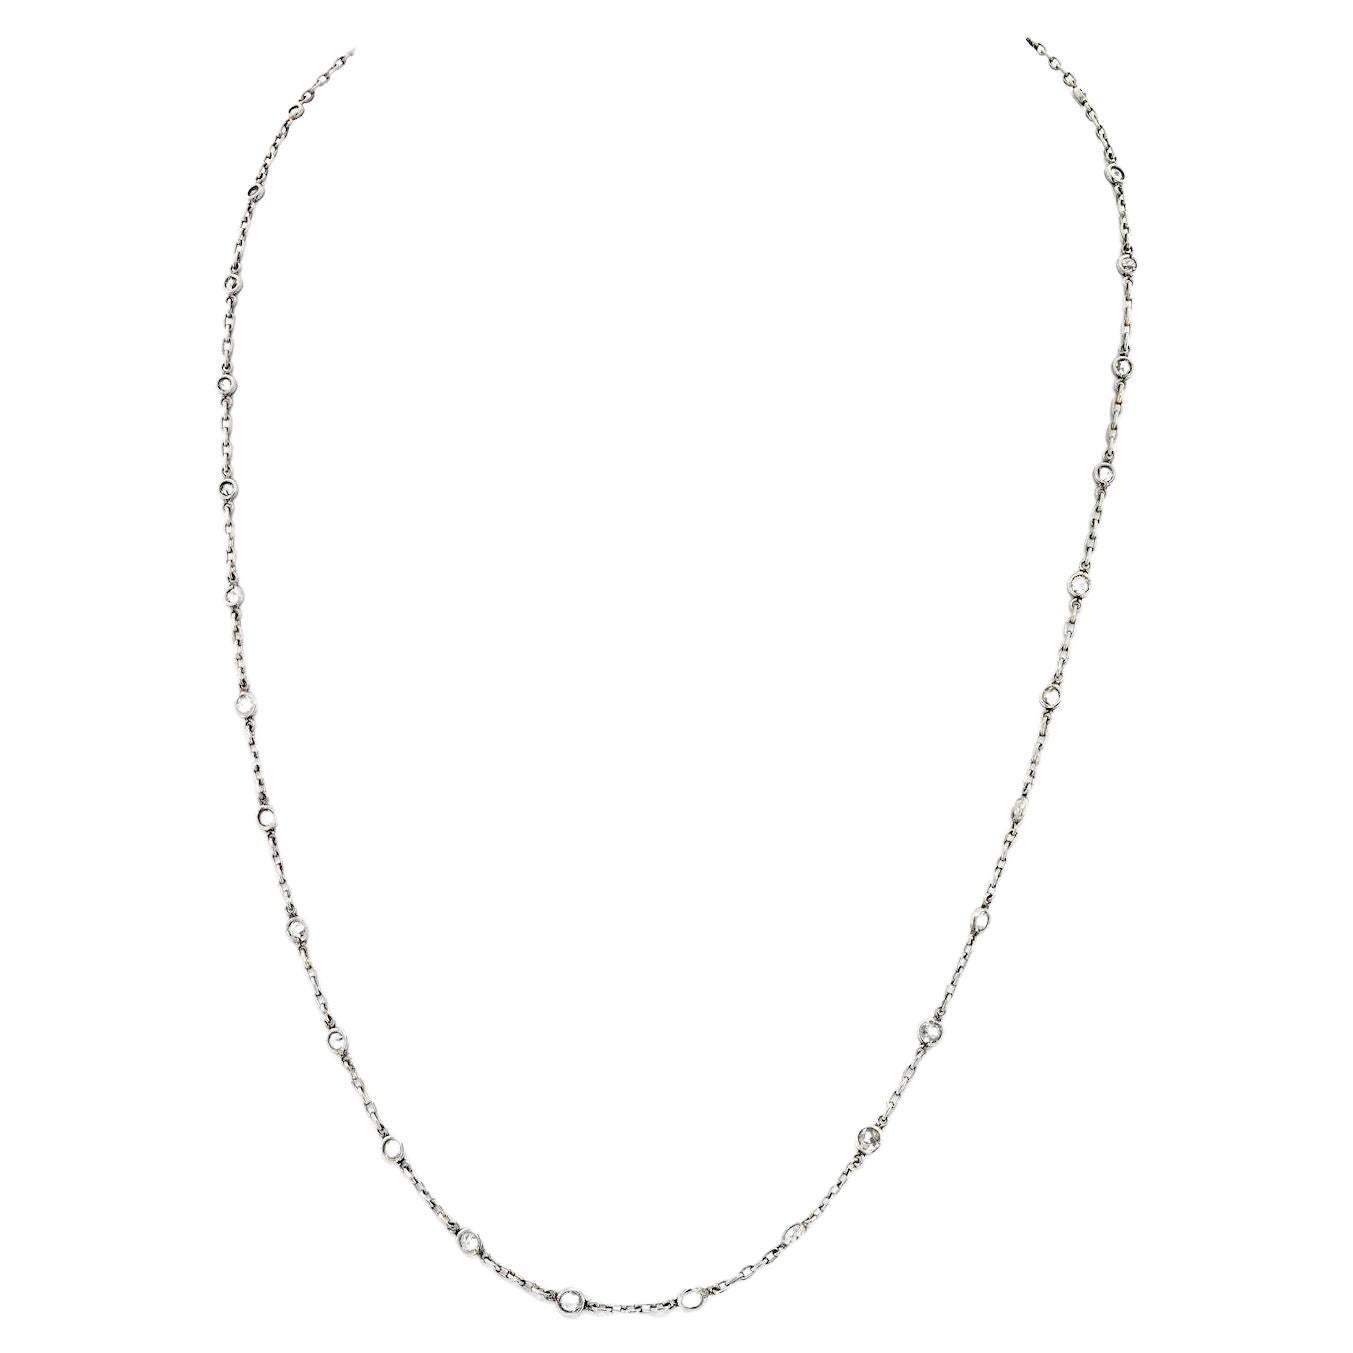 Platinum 2.85cttw Diamond by the Yard Chain Necklace